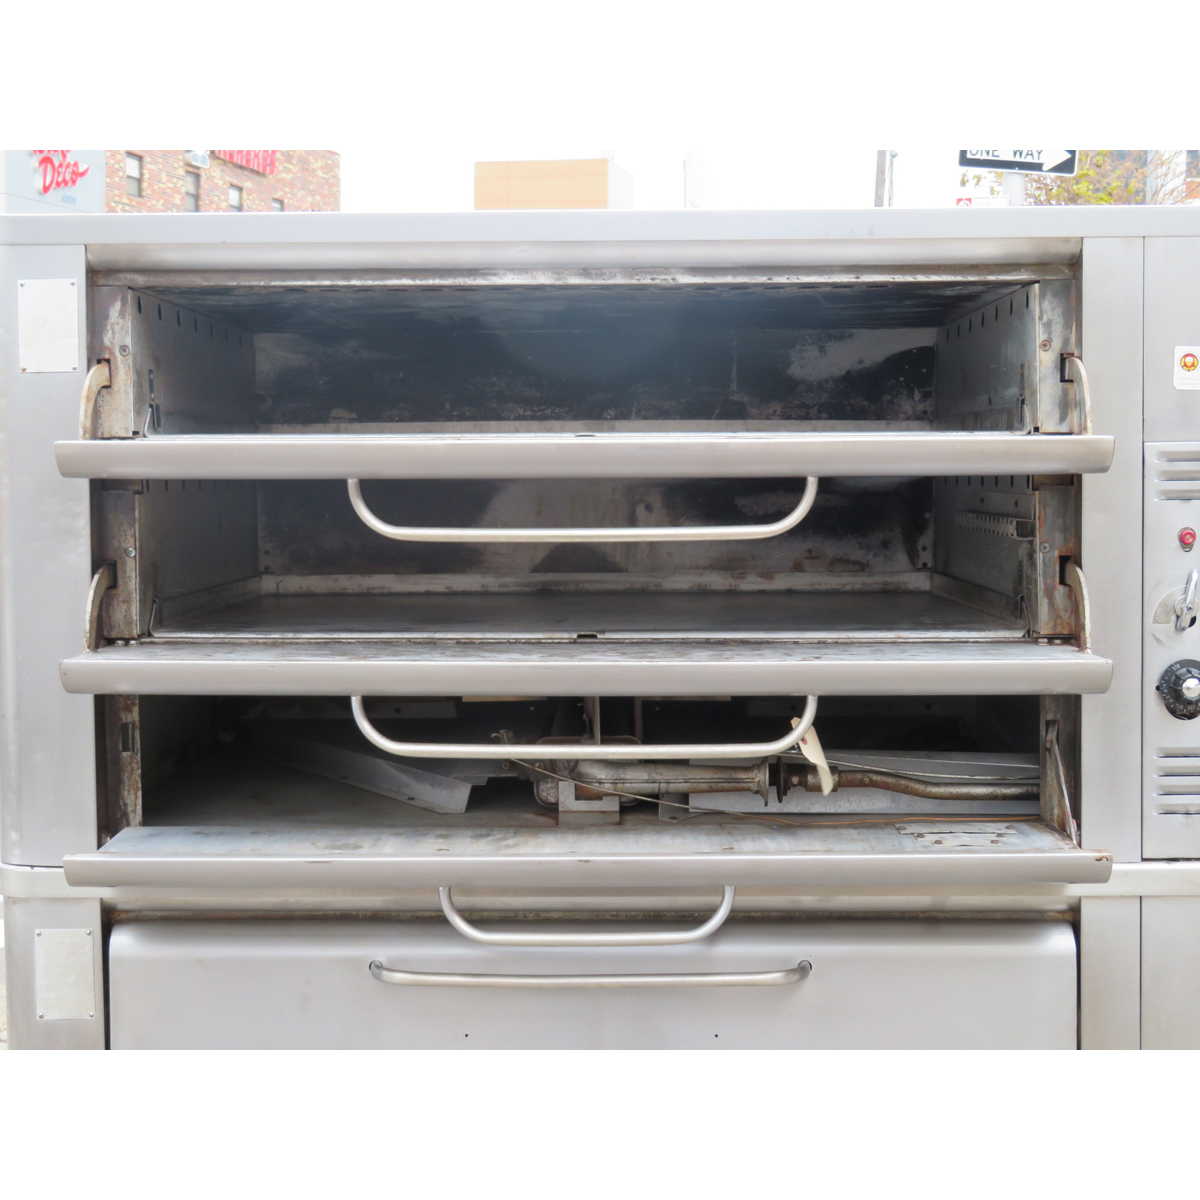 Blodgett 981/981 Double Deck Natural Gas Oven, Used Very Good Condition image 2